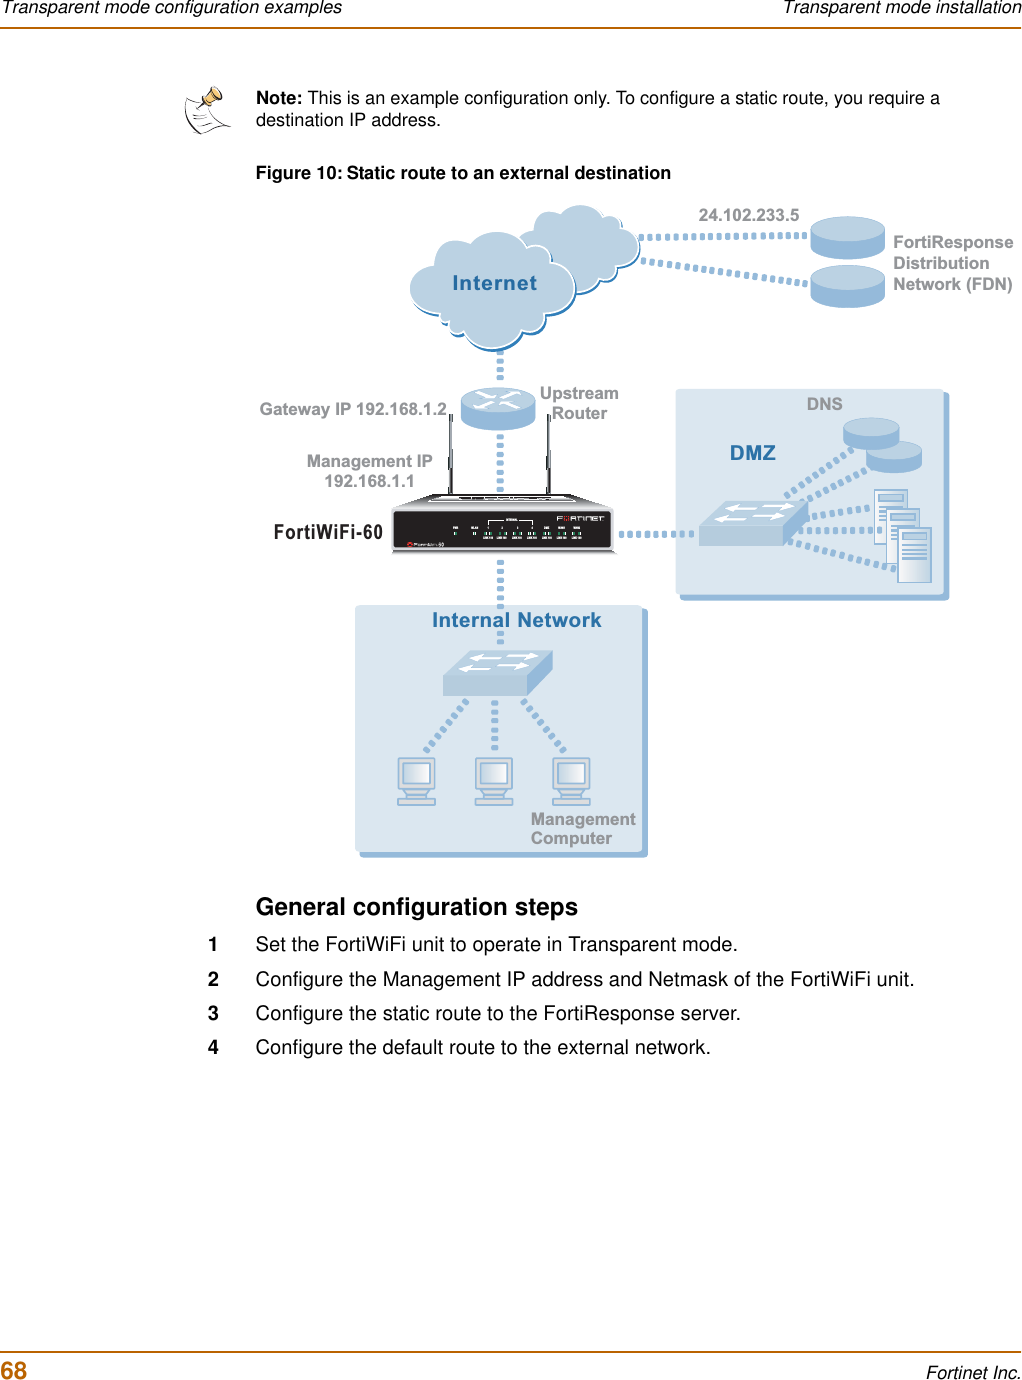 68 Fortinet Inc.Transparent mode configuration examples Transparent mode installationFigure 10: Static route to an external destinationGeneral configuration steps1Set the FortiWiFi unit to operate in Transparent mode.2Configure the Management IP address and Netmask of the FortiWiFi unit.3Configure the static route to the FortiResponse server.4Configure the default route to the external network.Note: This is an example configuration only. To configure a static route, you require a destination IP address.ManagementComputerInternal NetworkDMZInternetUpstreamRouterGateway IP 192.168.1.2Management IP192.168.1.1FortiResponseDistributionNetwork (FDN)DNS24.102.233.5FortiWiFi-60INTERNALDMZ4321LINK 100 LINK 100 LINK 100 LINK 100 LINK 100 LINK 100 LINK 100WAN1 WAN 2PWR WLAN